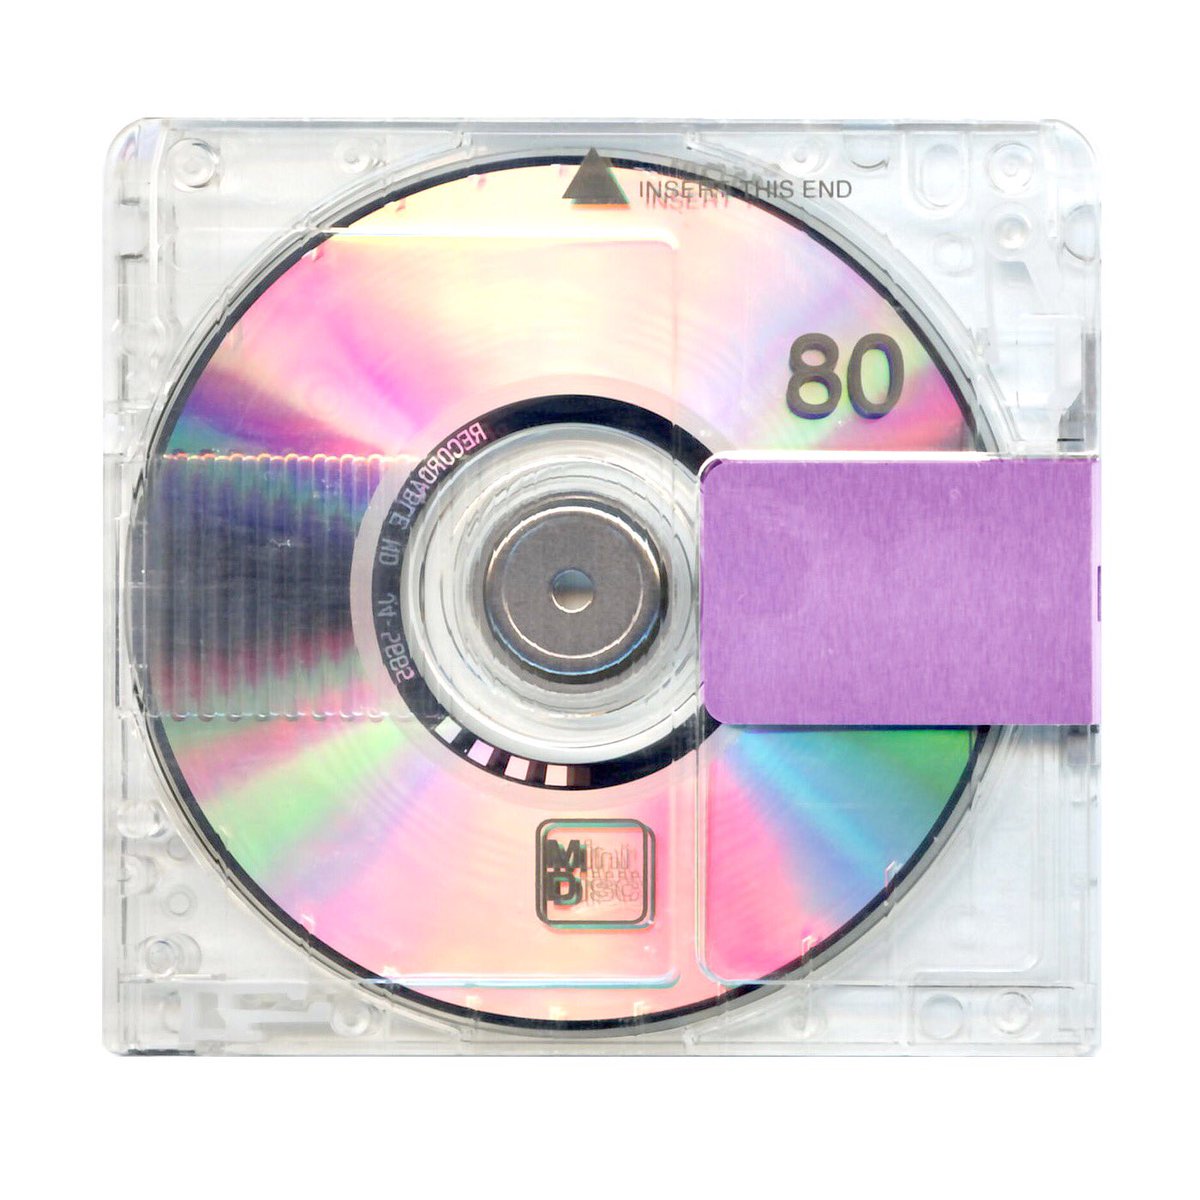 Kanye West Announces 'Yeezus' Sequel 'Yandhi' & Release Date | HipHop-N-More1200 x 1200